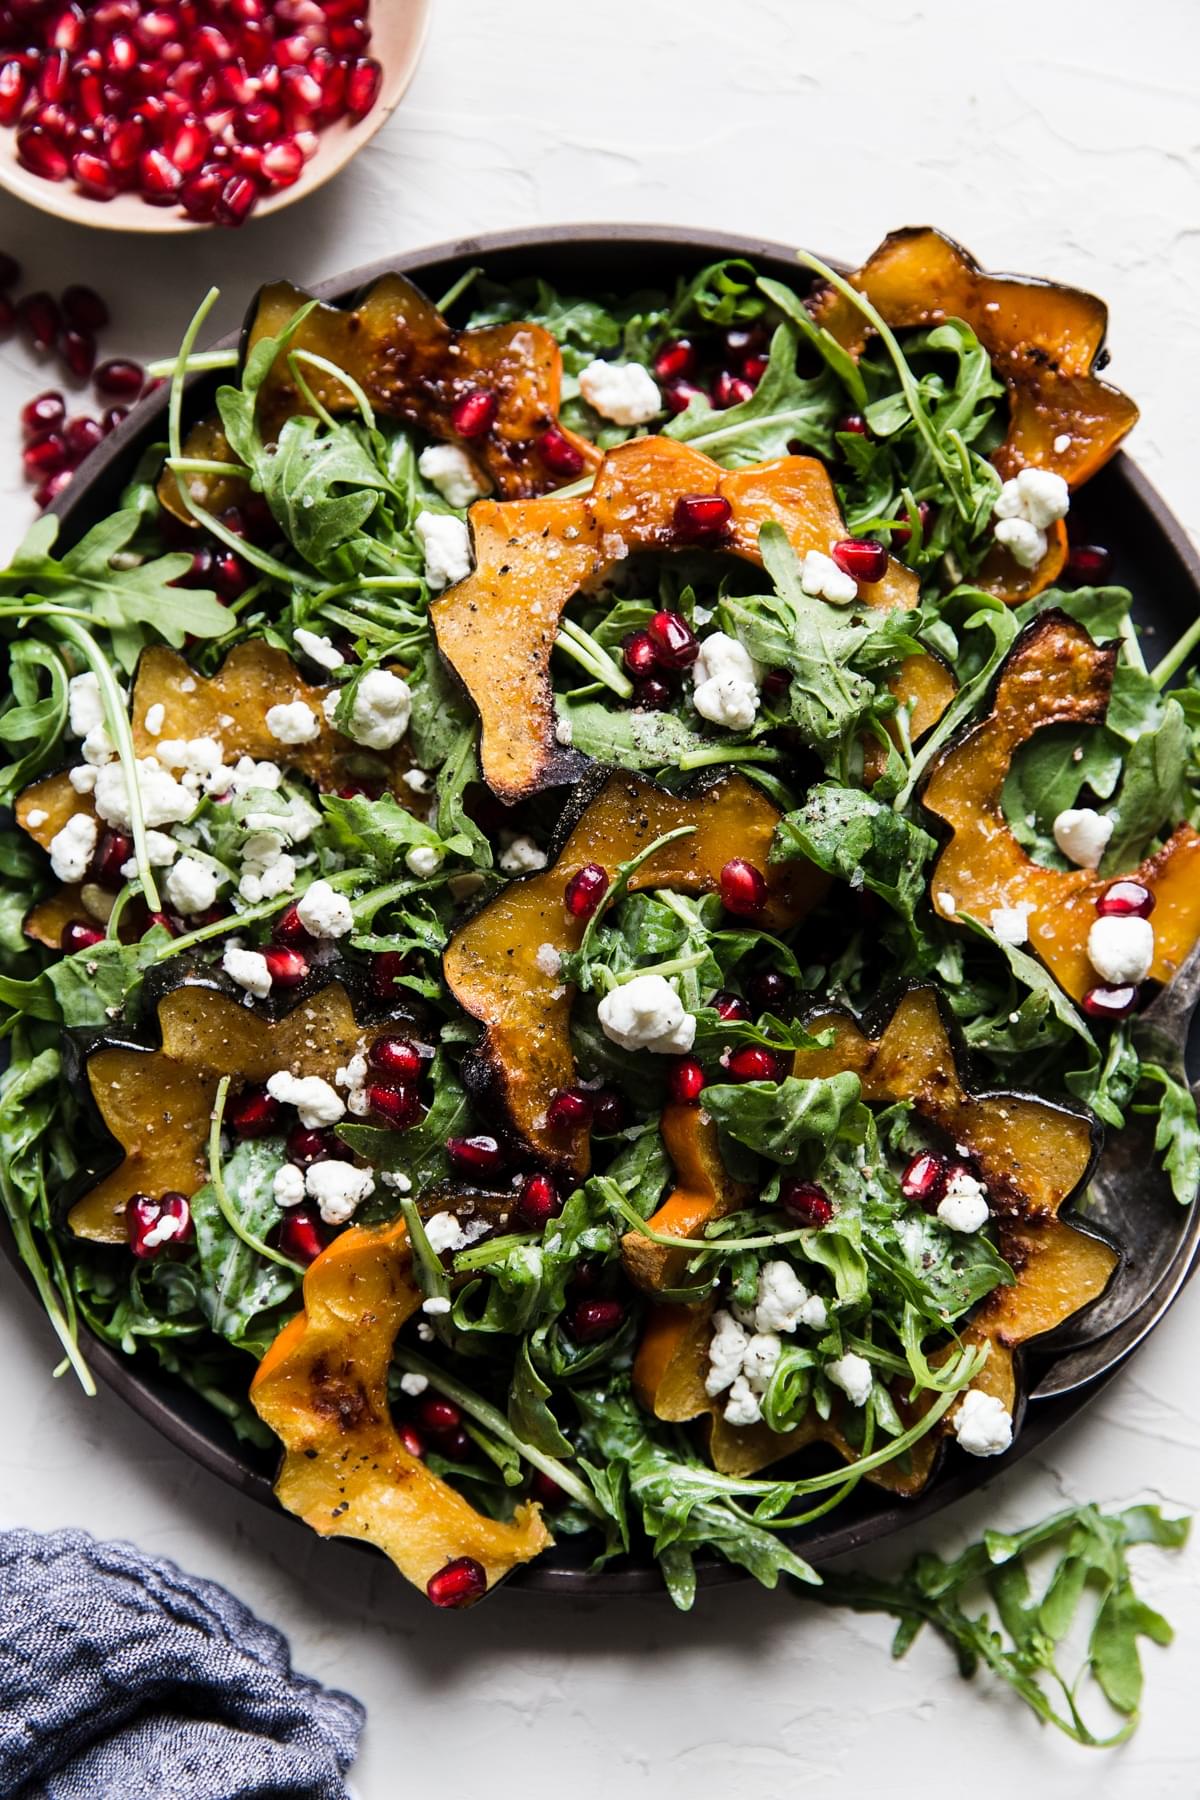 Arugula and roasted acorn squash salad made with a goat cheese dressing pumpkin seeds and pomegranates on a plate.